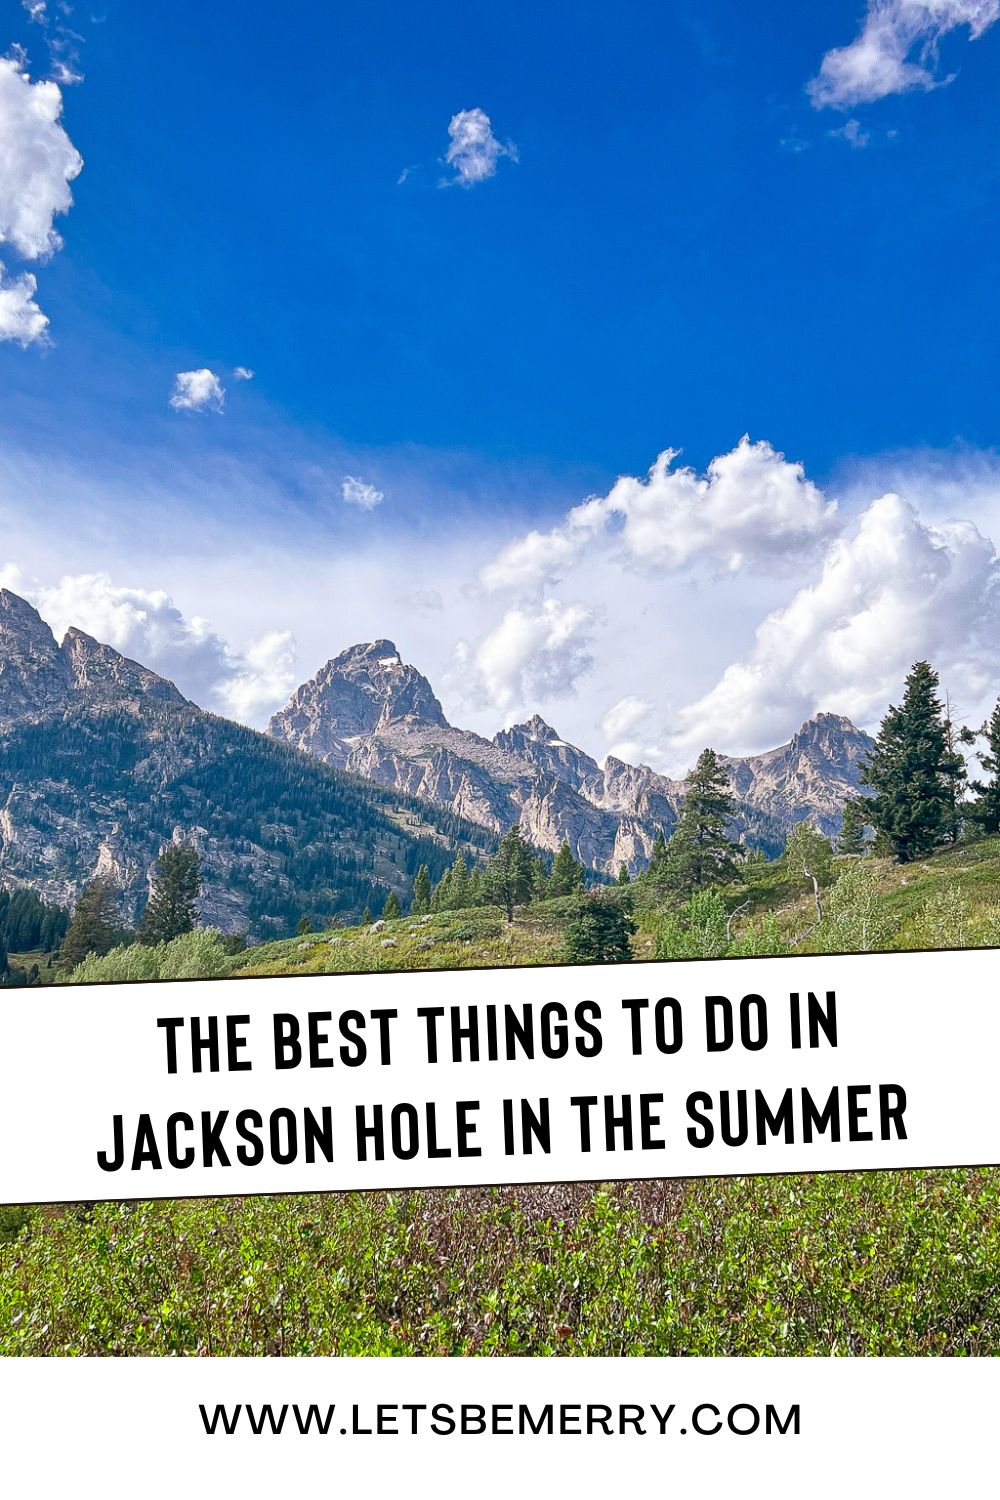 The 7 Best Things to Do in Jackson Hole, Wyoming During Summer